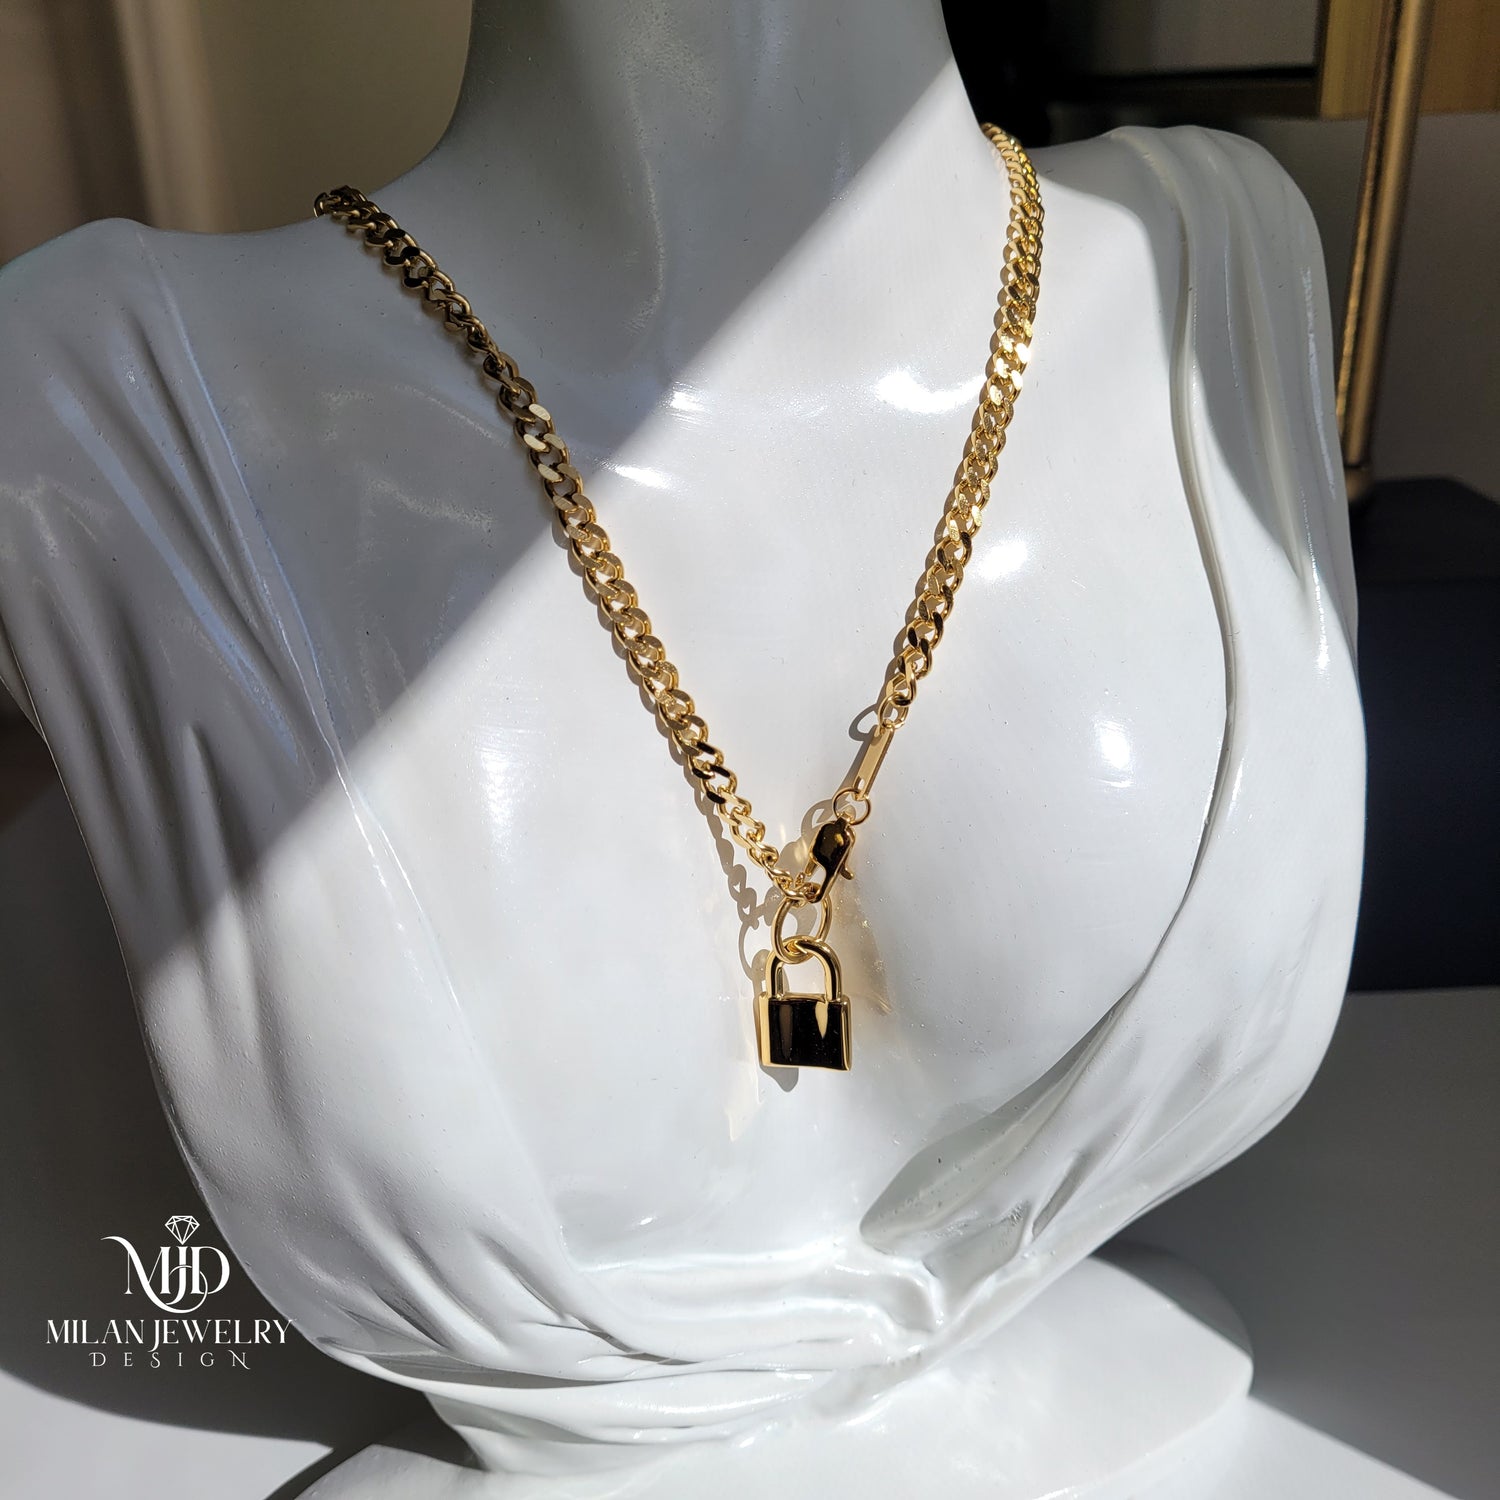 Louis Vuitton Gold Tone Lock and Key Necklace